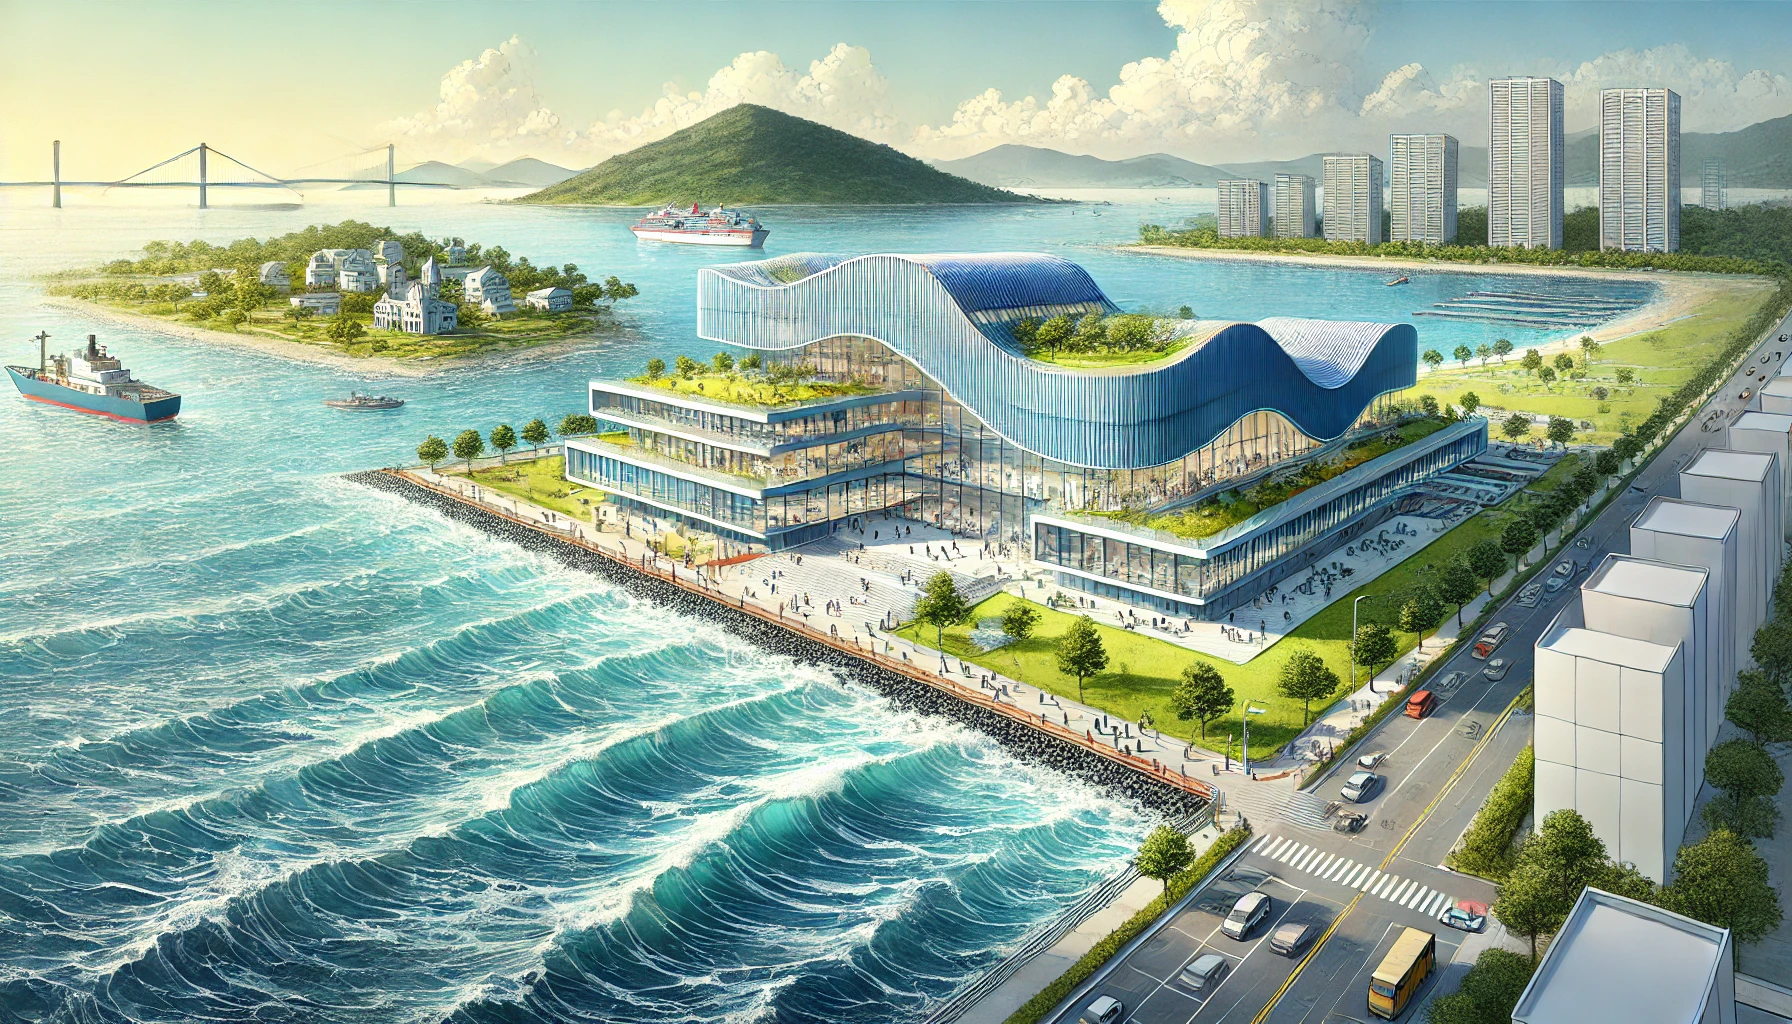 National Maritime Museum of Incheon is expected to be a hub of education, culture, and tourism, providing insights into Korea's relationship with the sea from the past to the future.